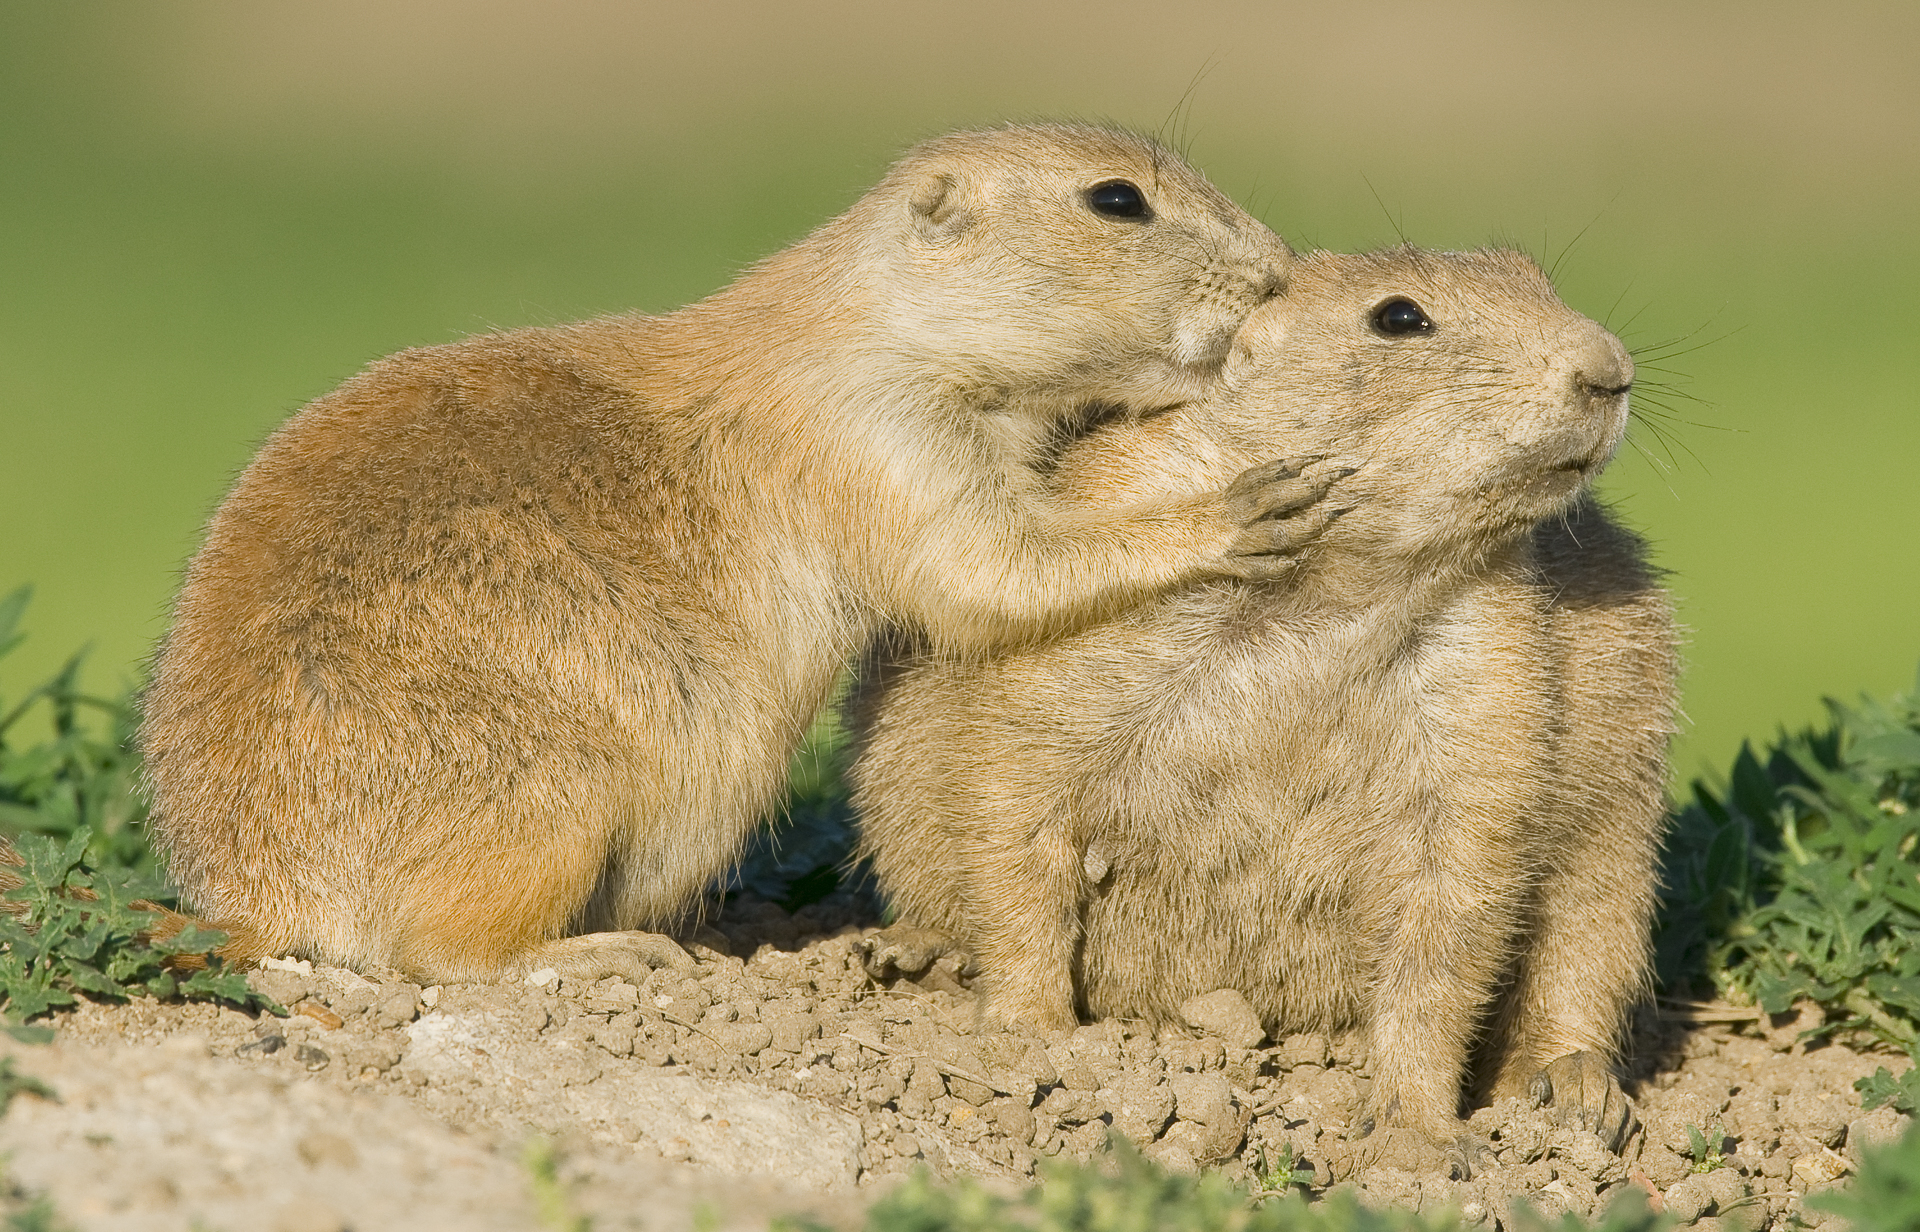 Prairie dogs grooming each other